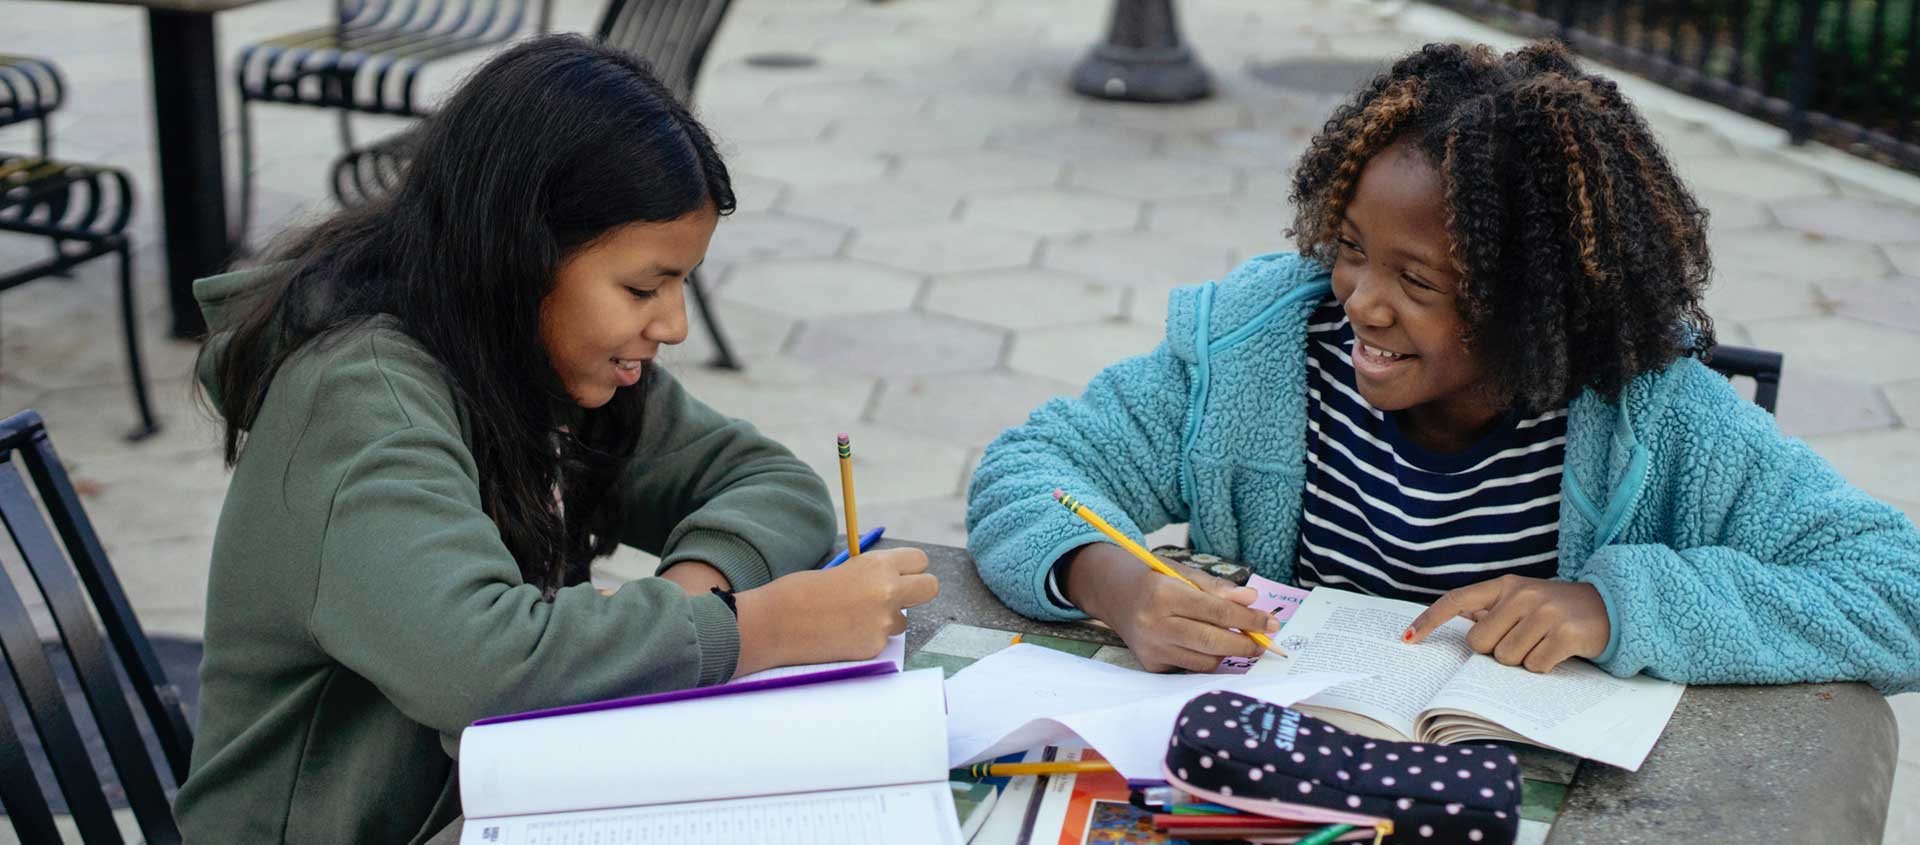 Two girls working on school work at an outdoor table. 